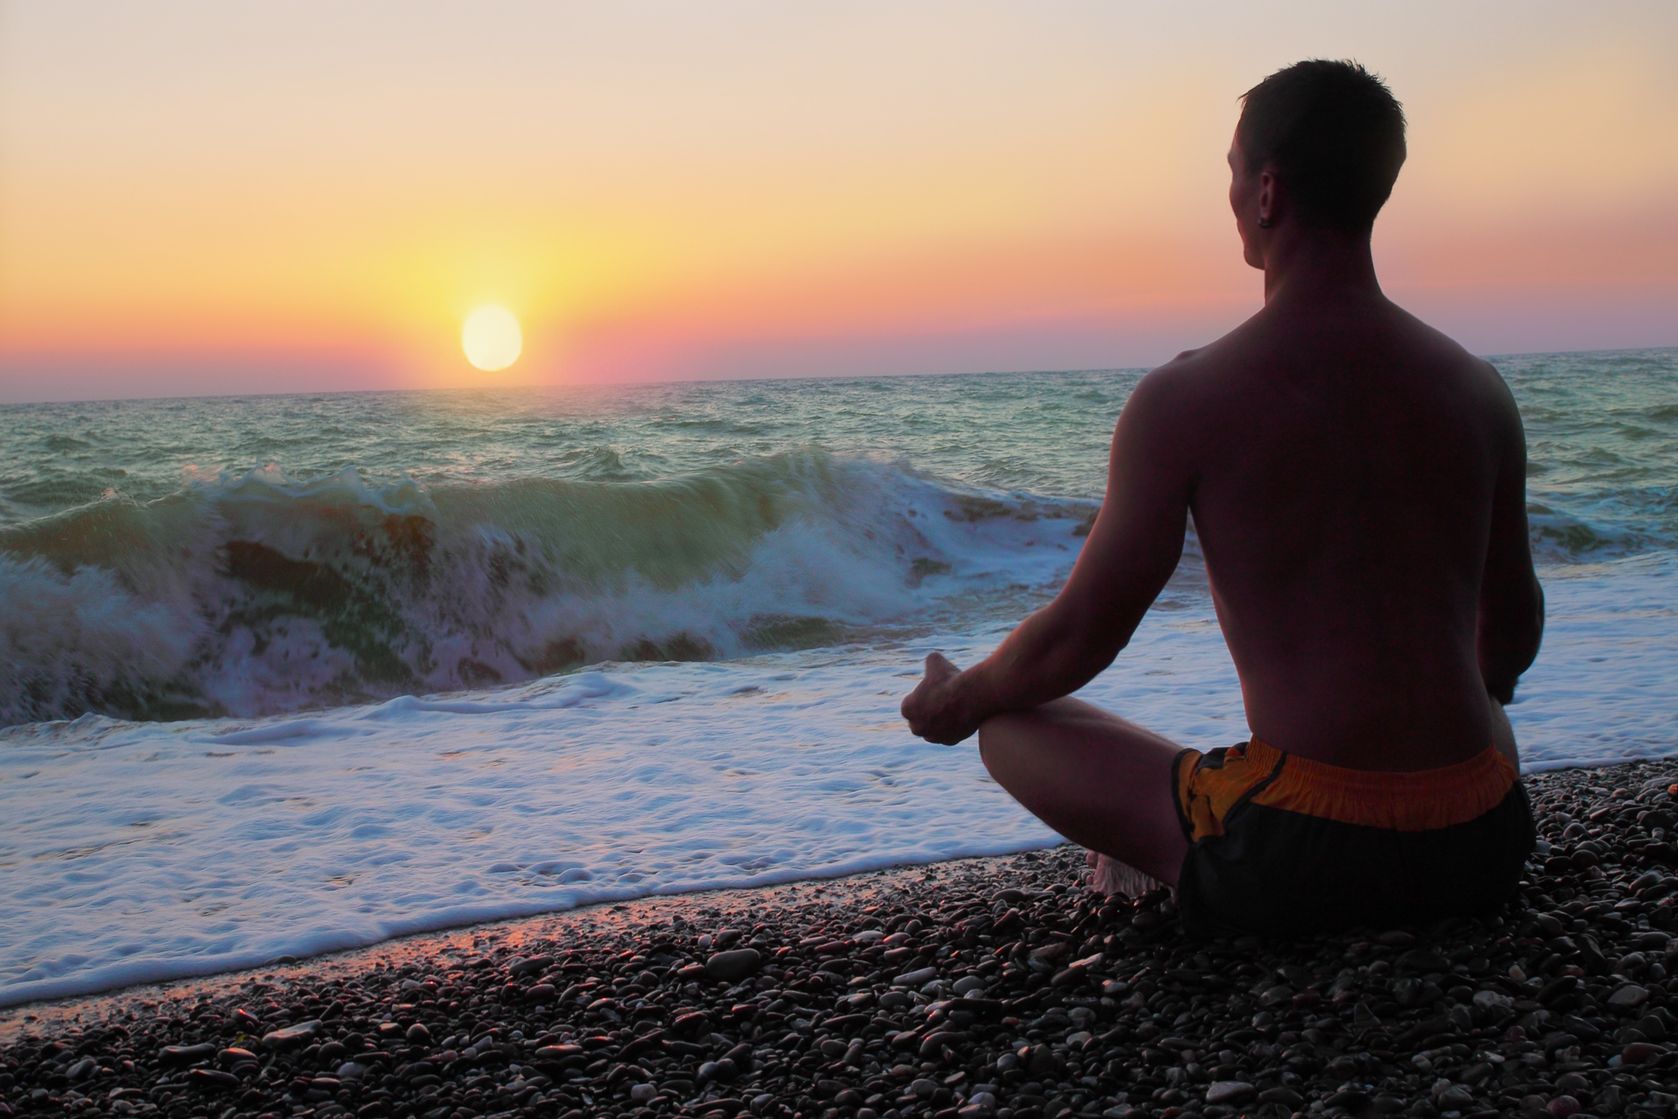  A person sits on the beach in a meditative pose as the sun sets over the ocean.